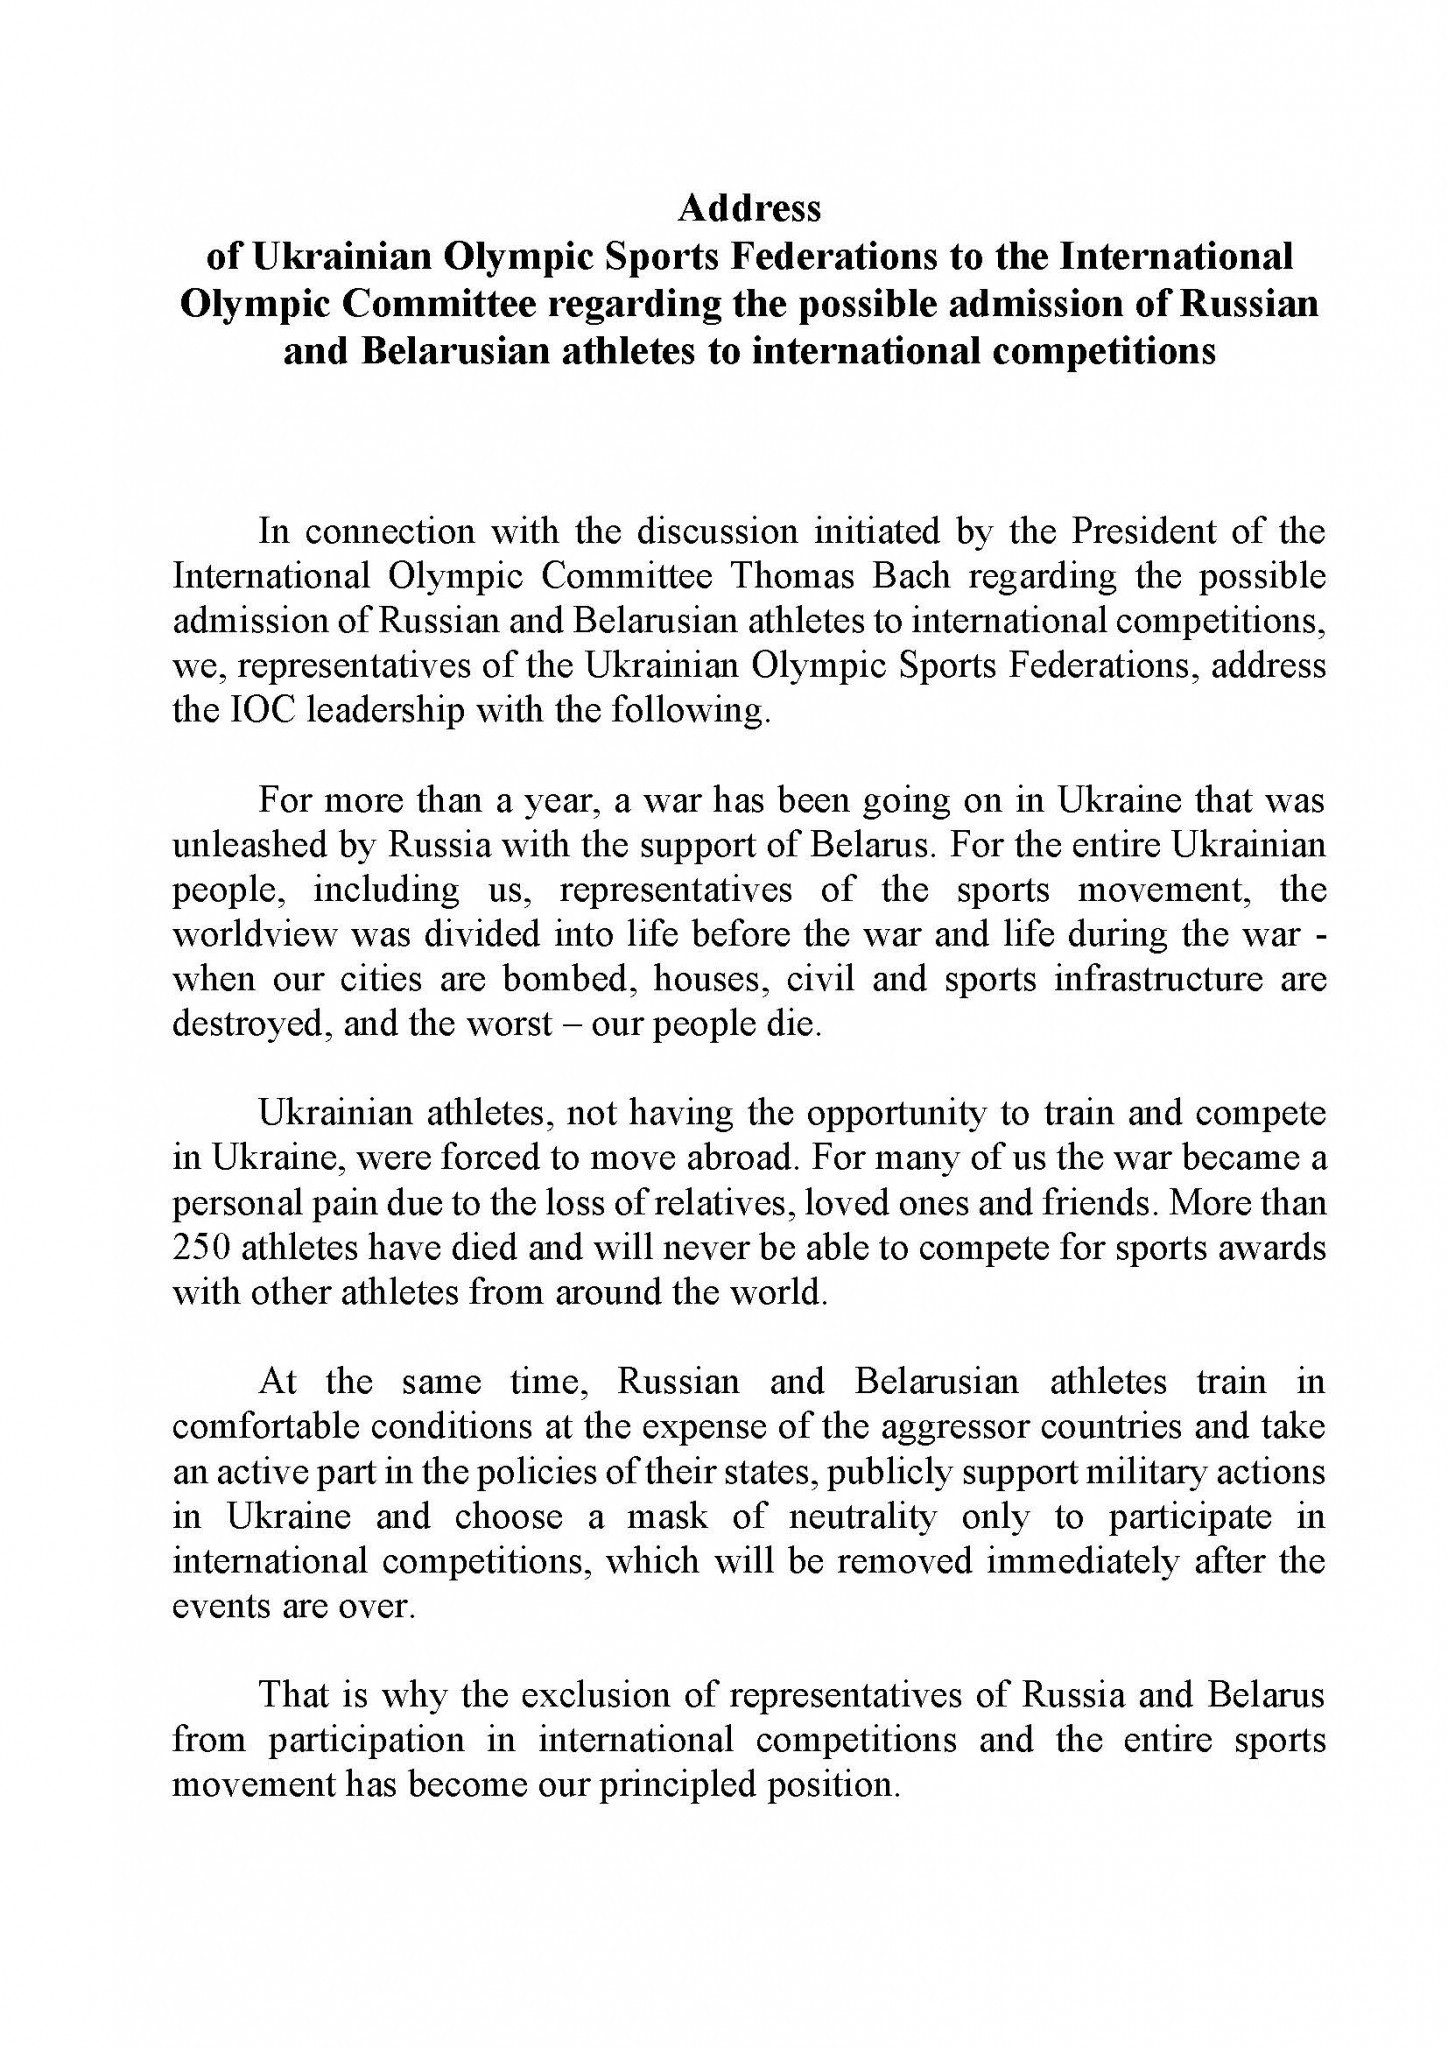 Ukraine's Olympic federations insisted that the IOC's current recommendations against the participation of Russian and Belarusian athletes were 